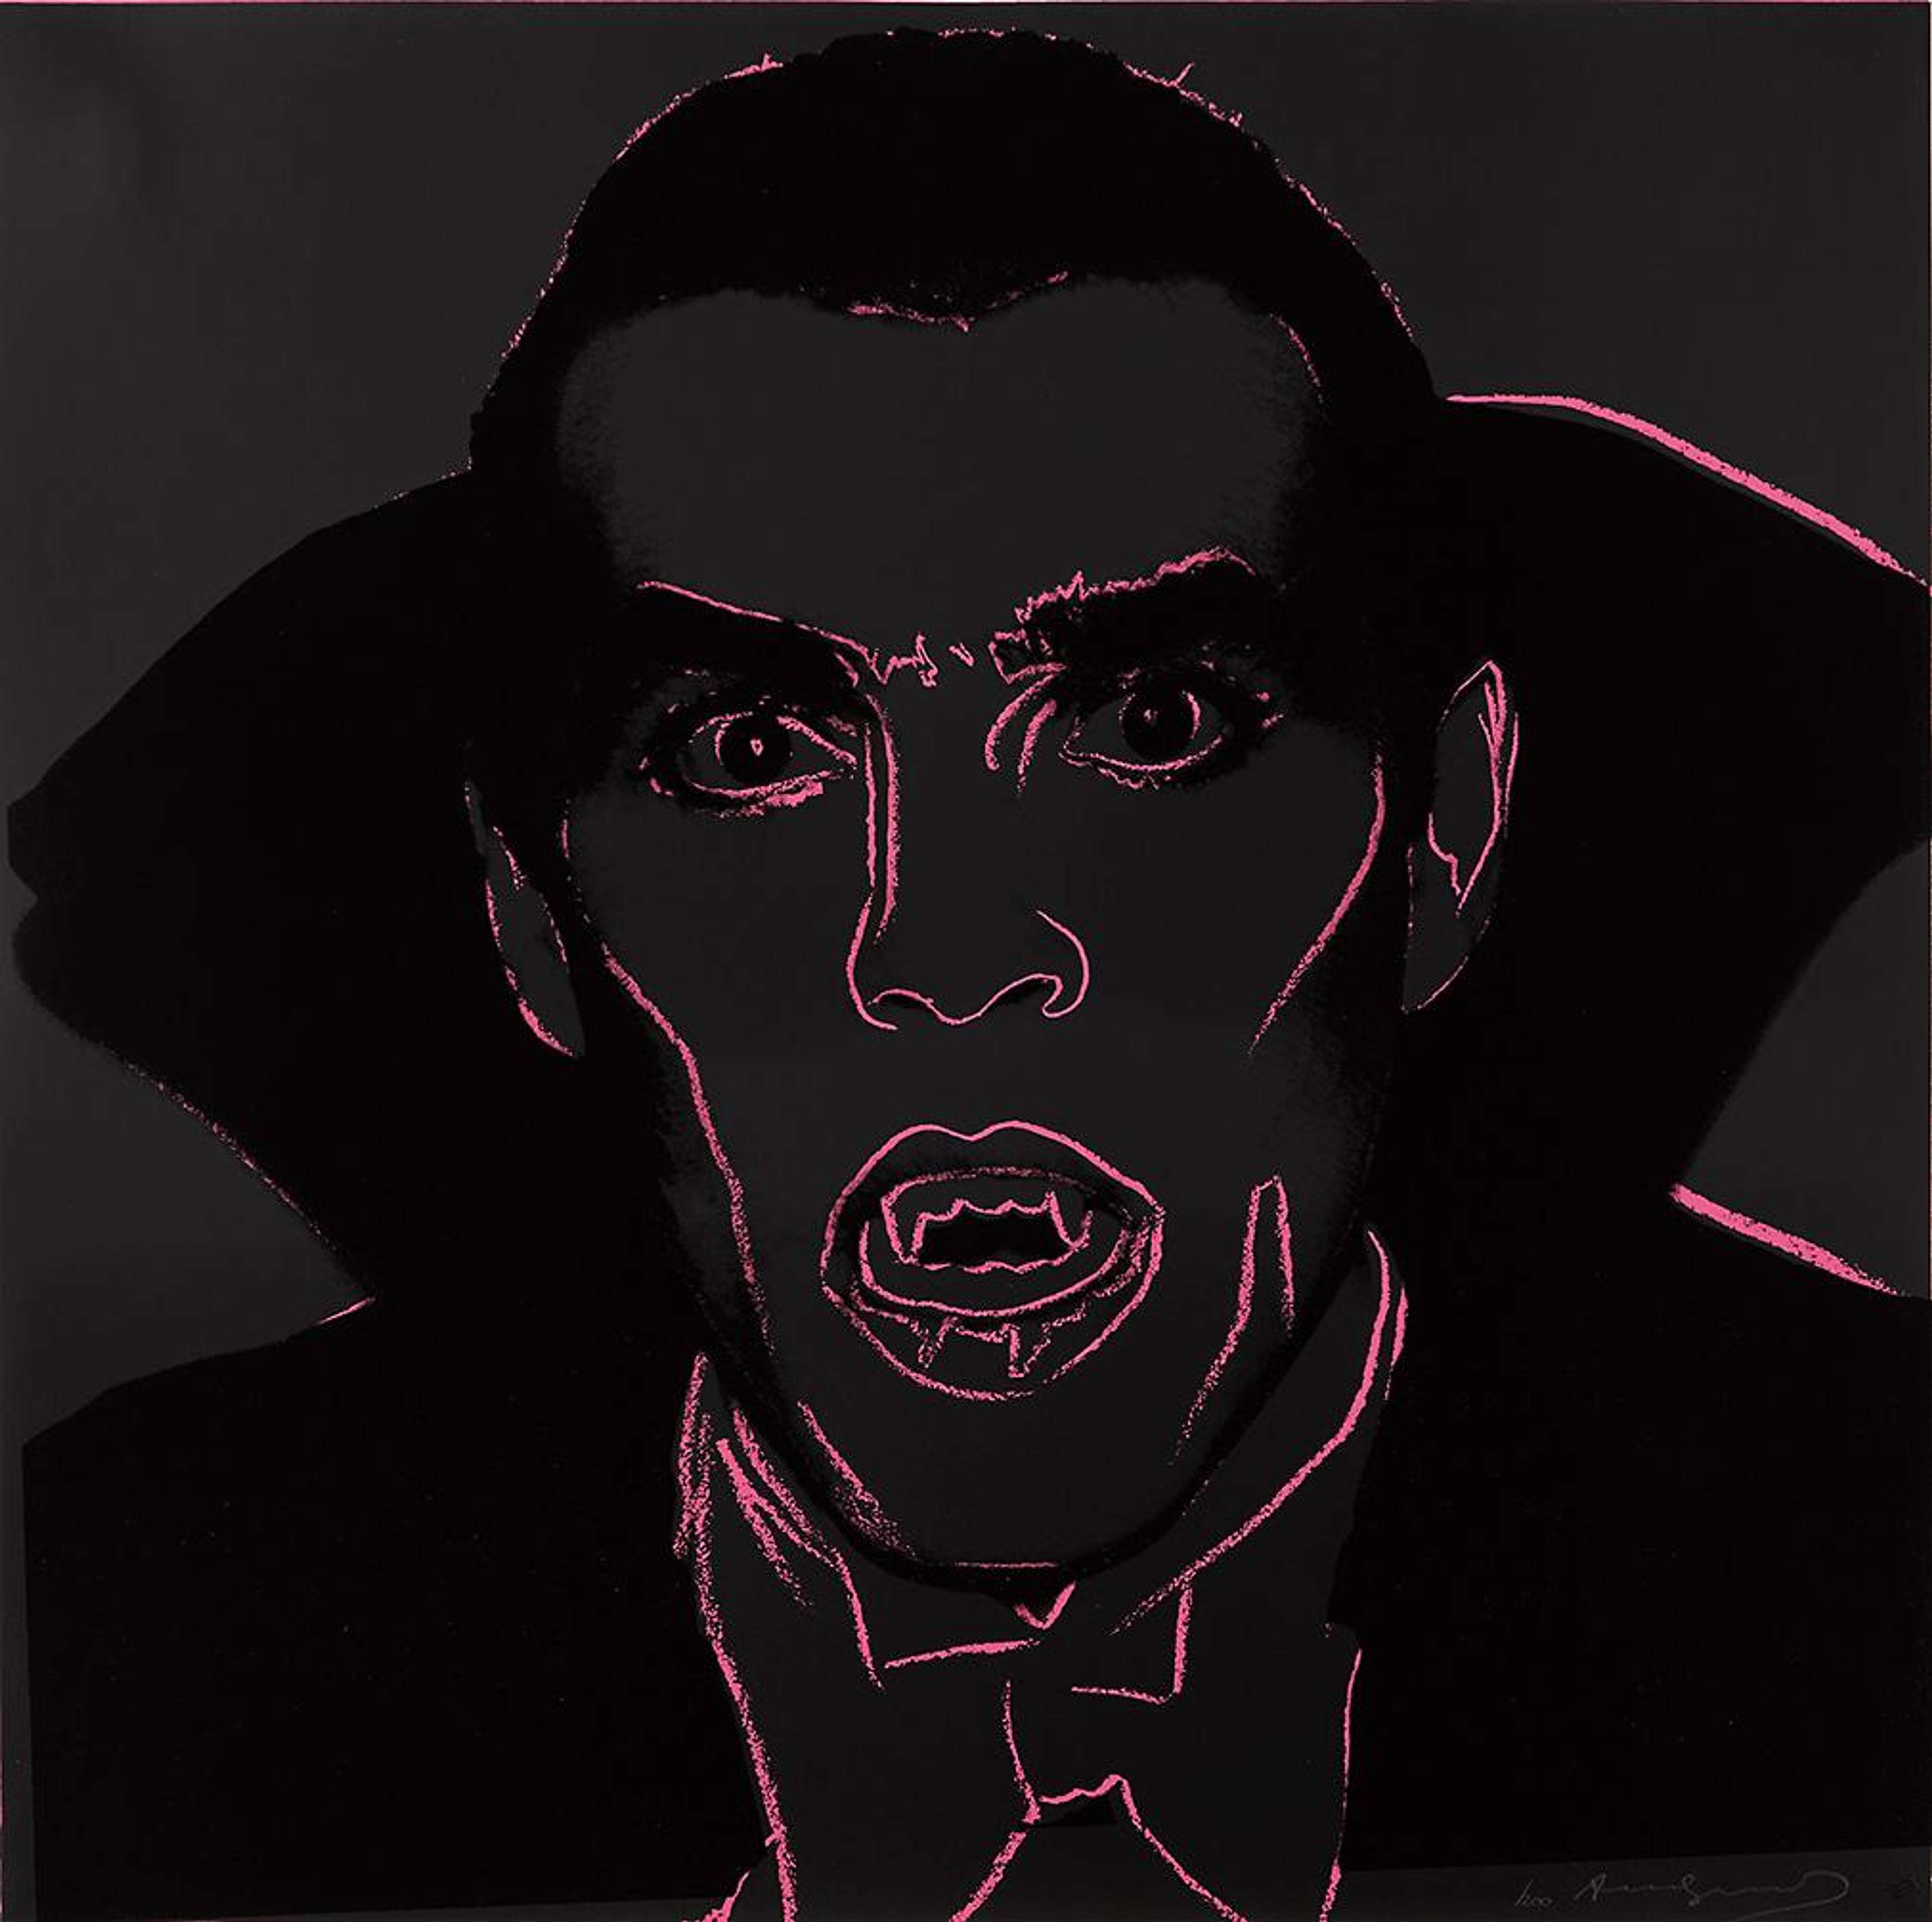 The print shows the notorious evil vampire, Count Dracula, from the novel written by Bram Stoker in 1897. Against a black backdrop, Dracula’s portrait is rendered using bright pink gestural lines which delineate his facial features, drawing attention to his furrowed brow, pointed ears and sharp fangs.